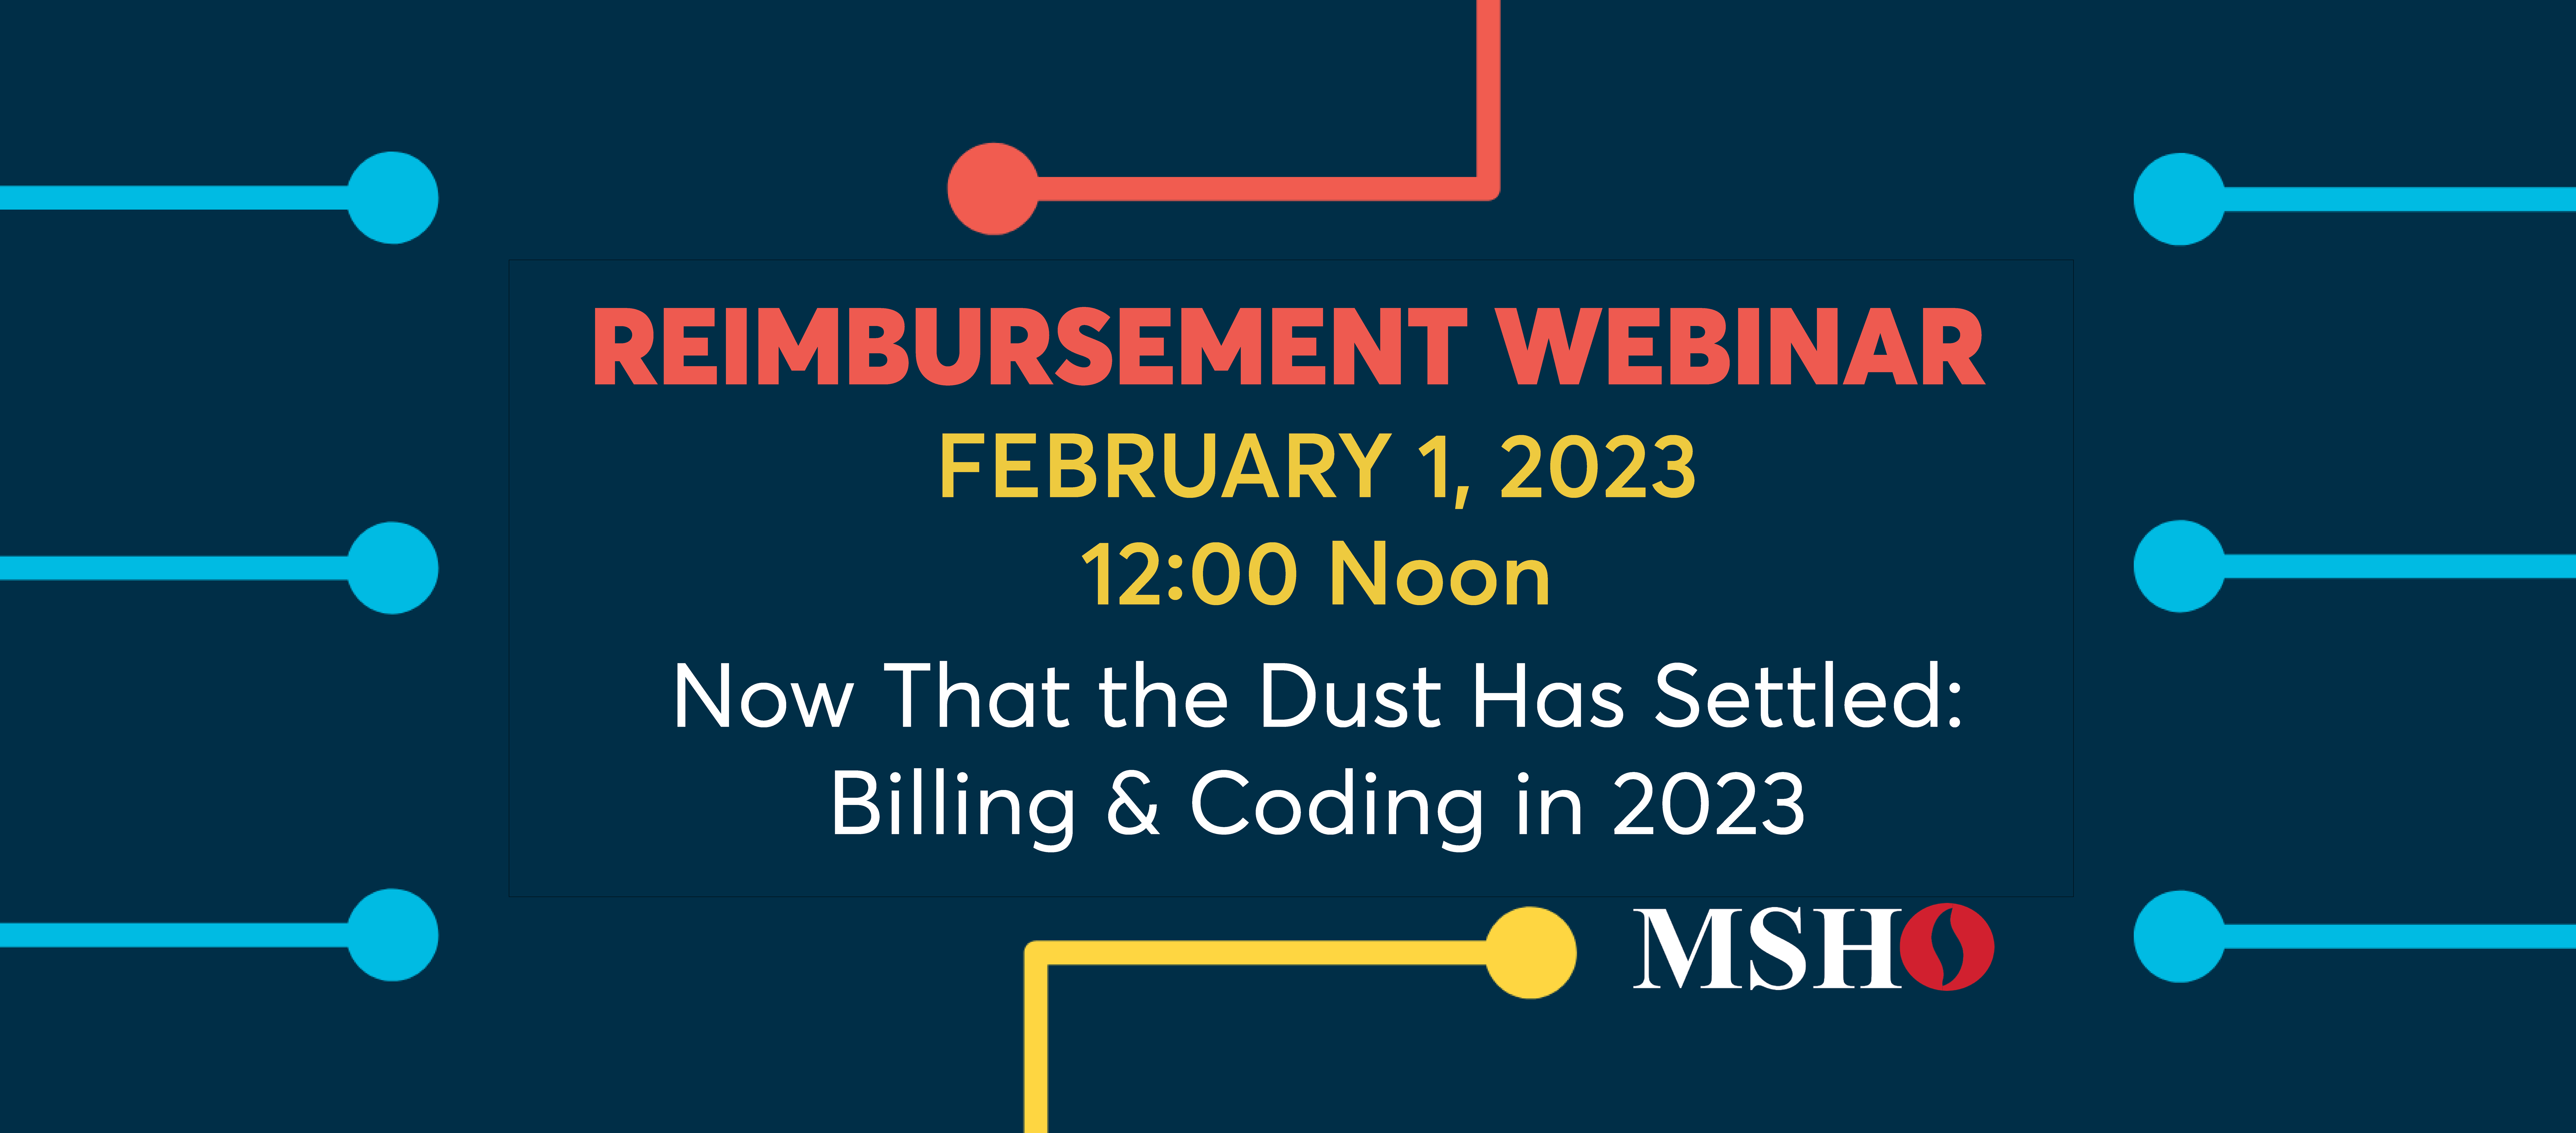 Now that the Dust Has Settled: Billing & Coding in 2023